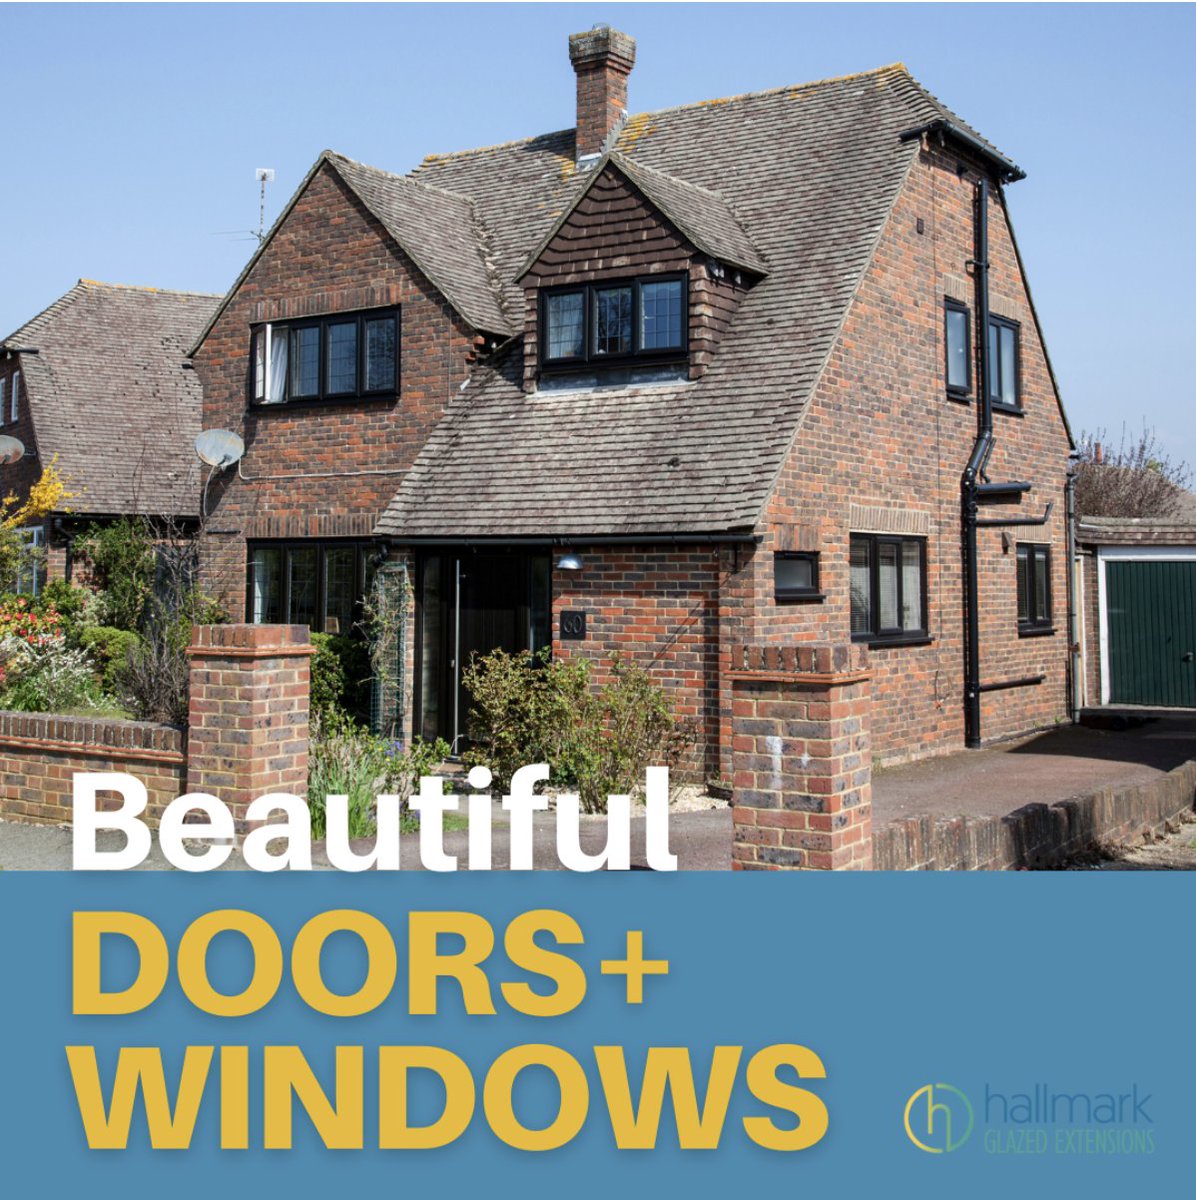 🪟🚪Transform your home with our beautiful quality windows and doors! 
Give us a call on 01323 671007 to treat your home to beautiful windows and doors.

#sussex
#EastSussex
#hailshambusiness 
#eastbournebusiness 
#homeextension 
#extension
#HomeImprovement
#windows
#doors